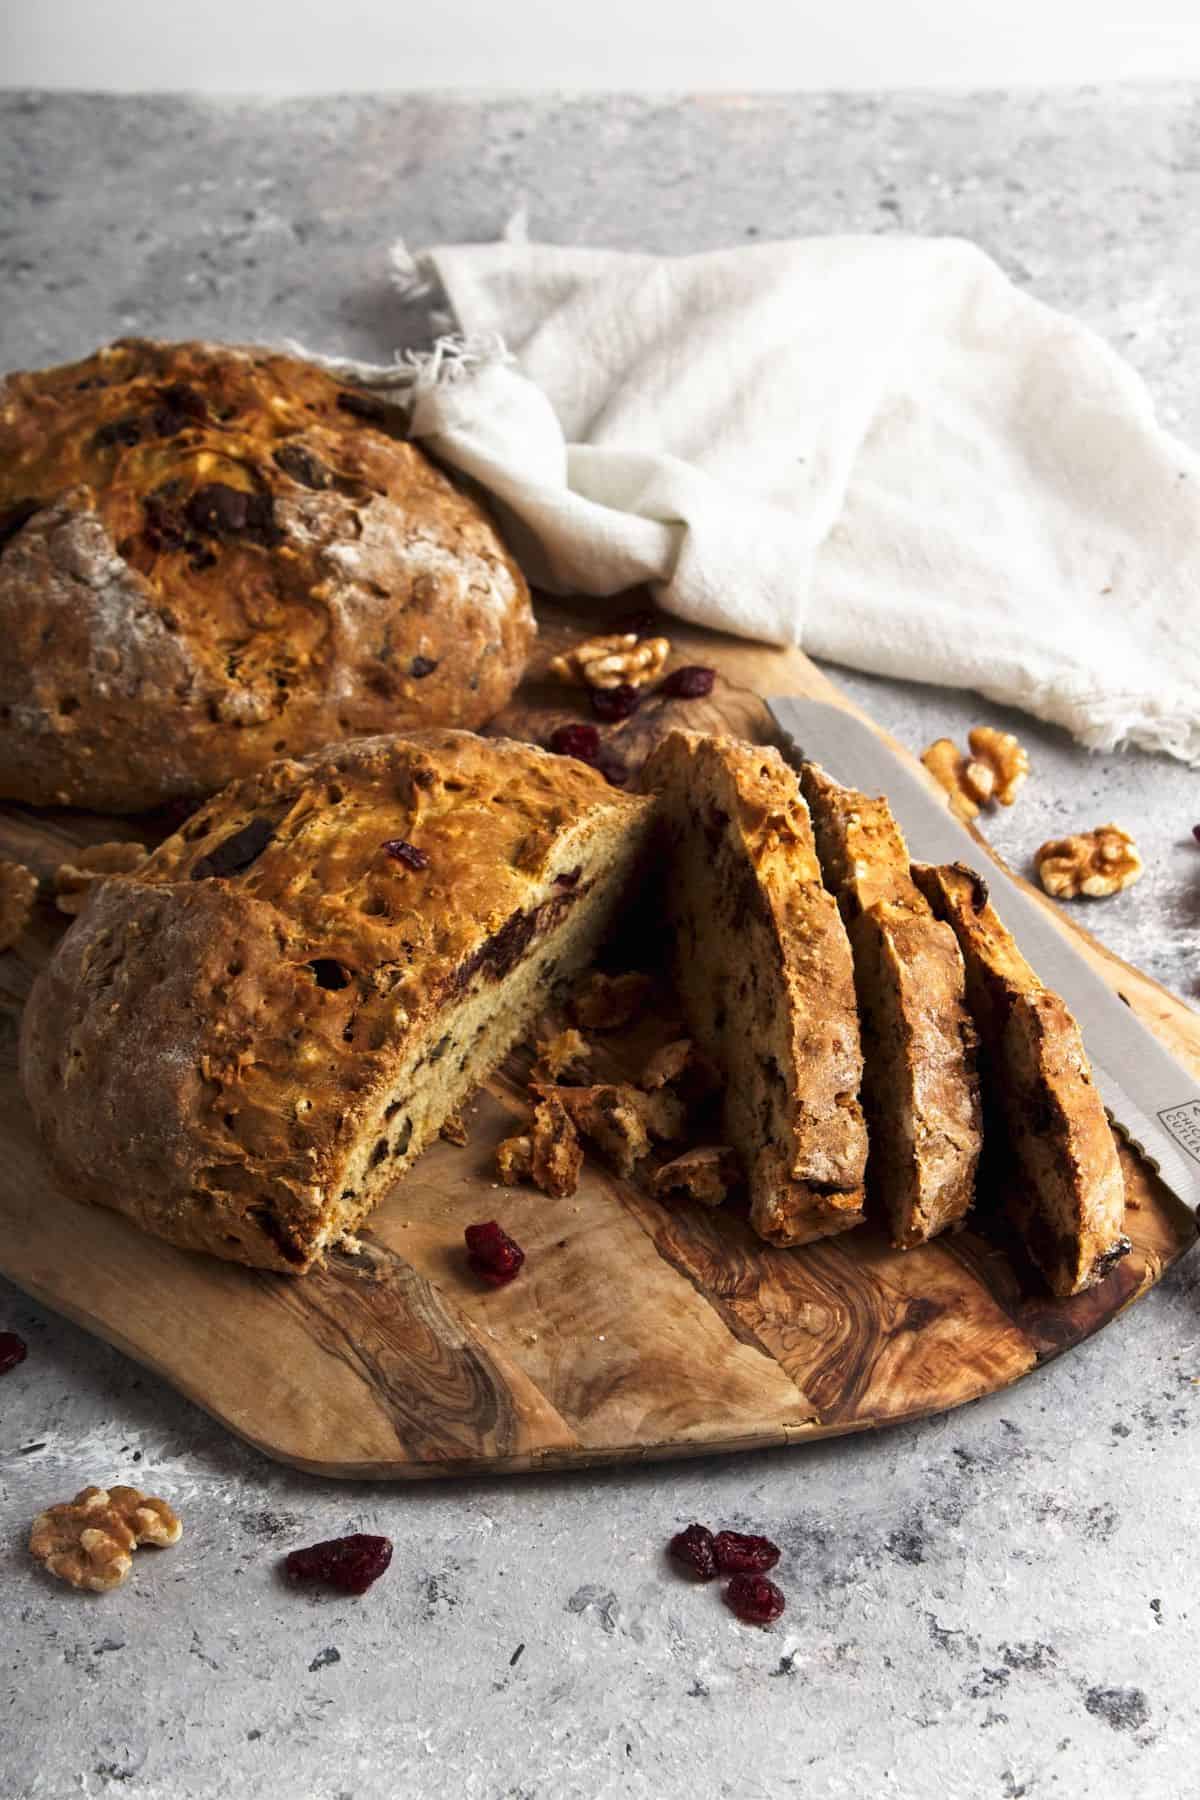 Bread with cranberries, walnuts, and chocolate chips partially sliced on cutting board.